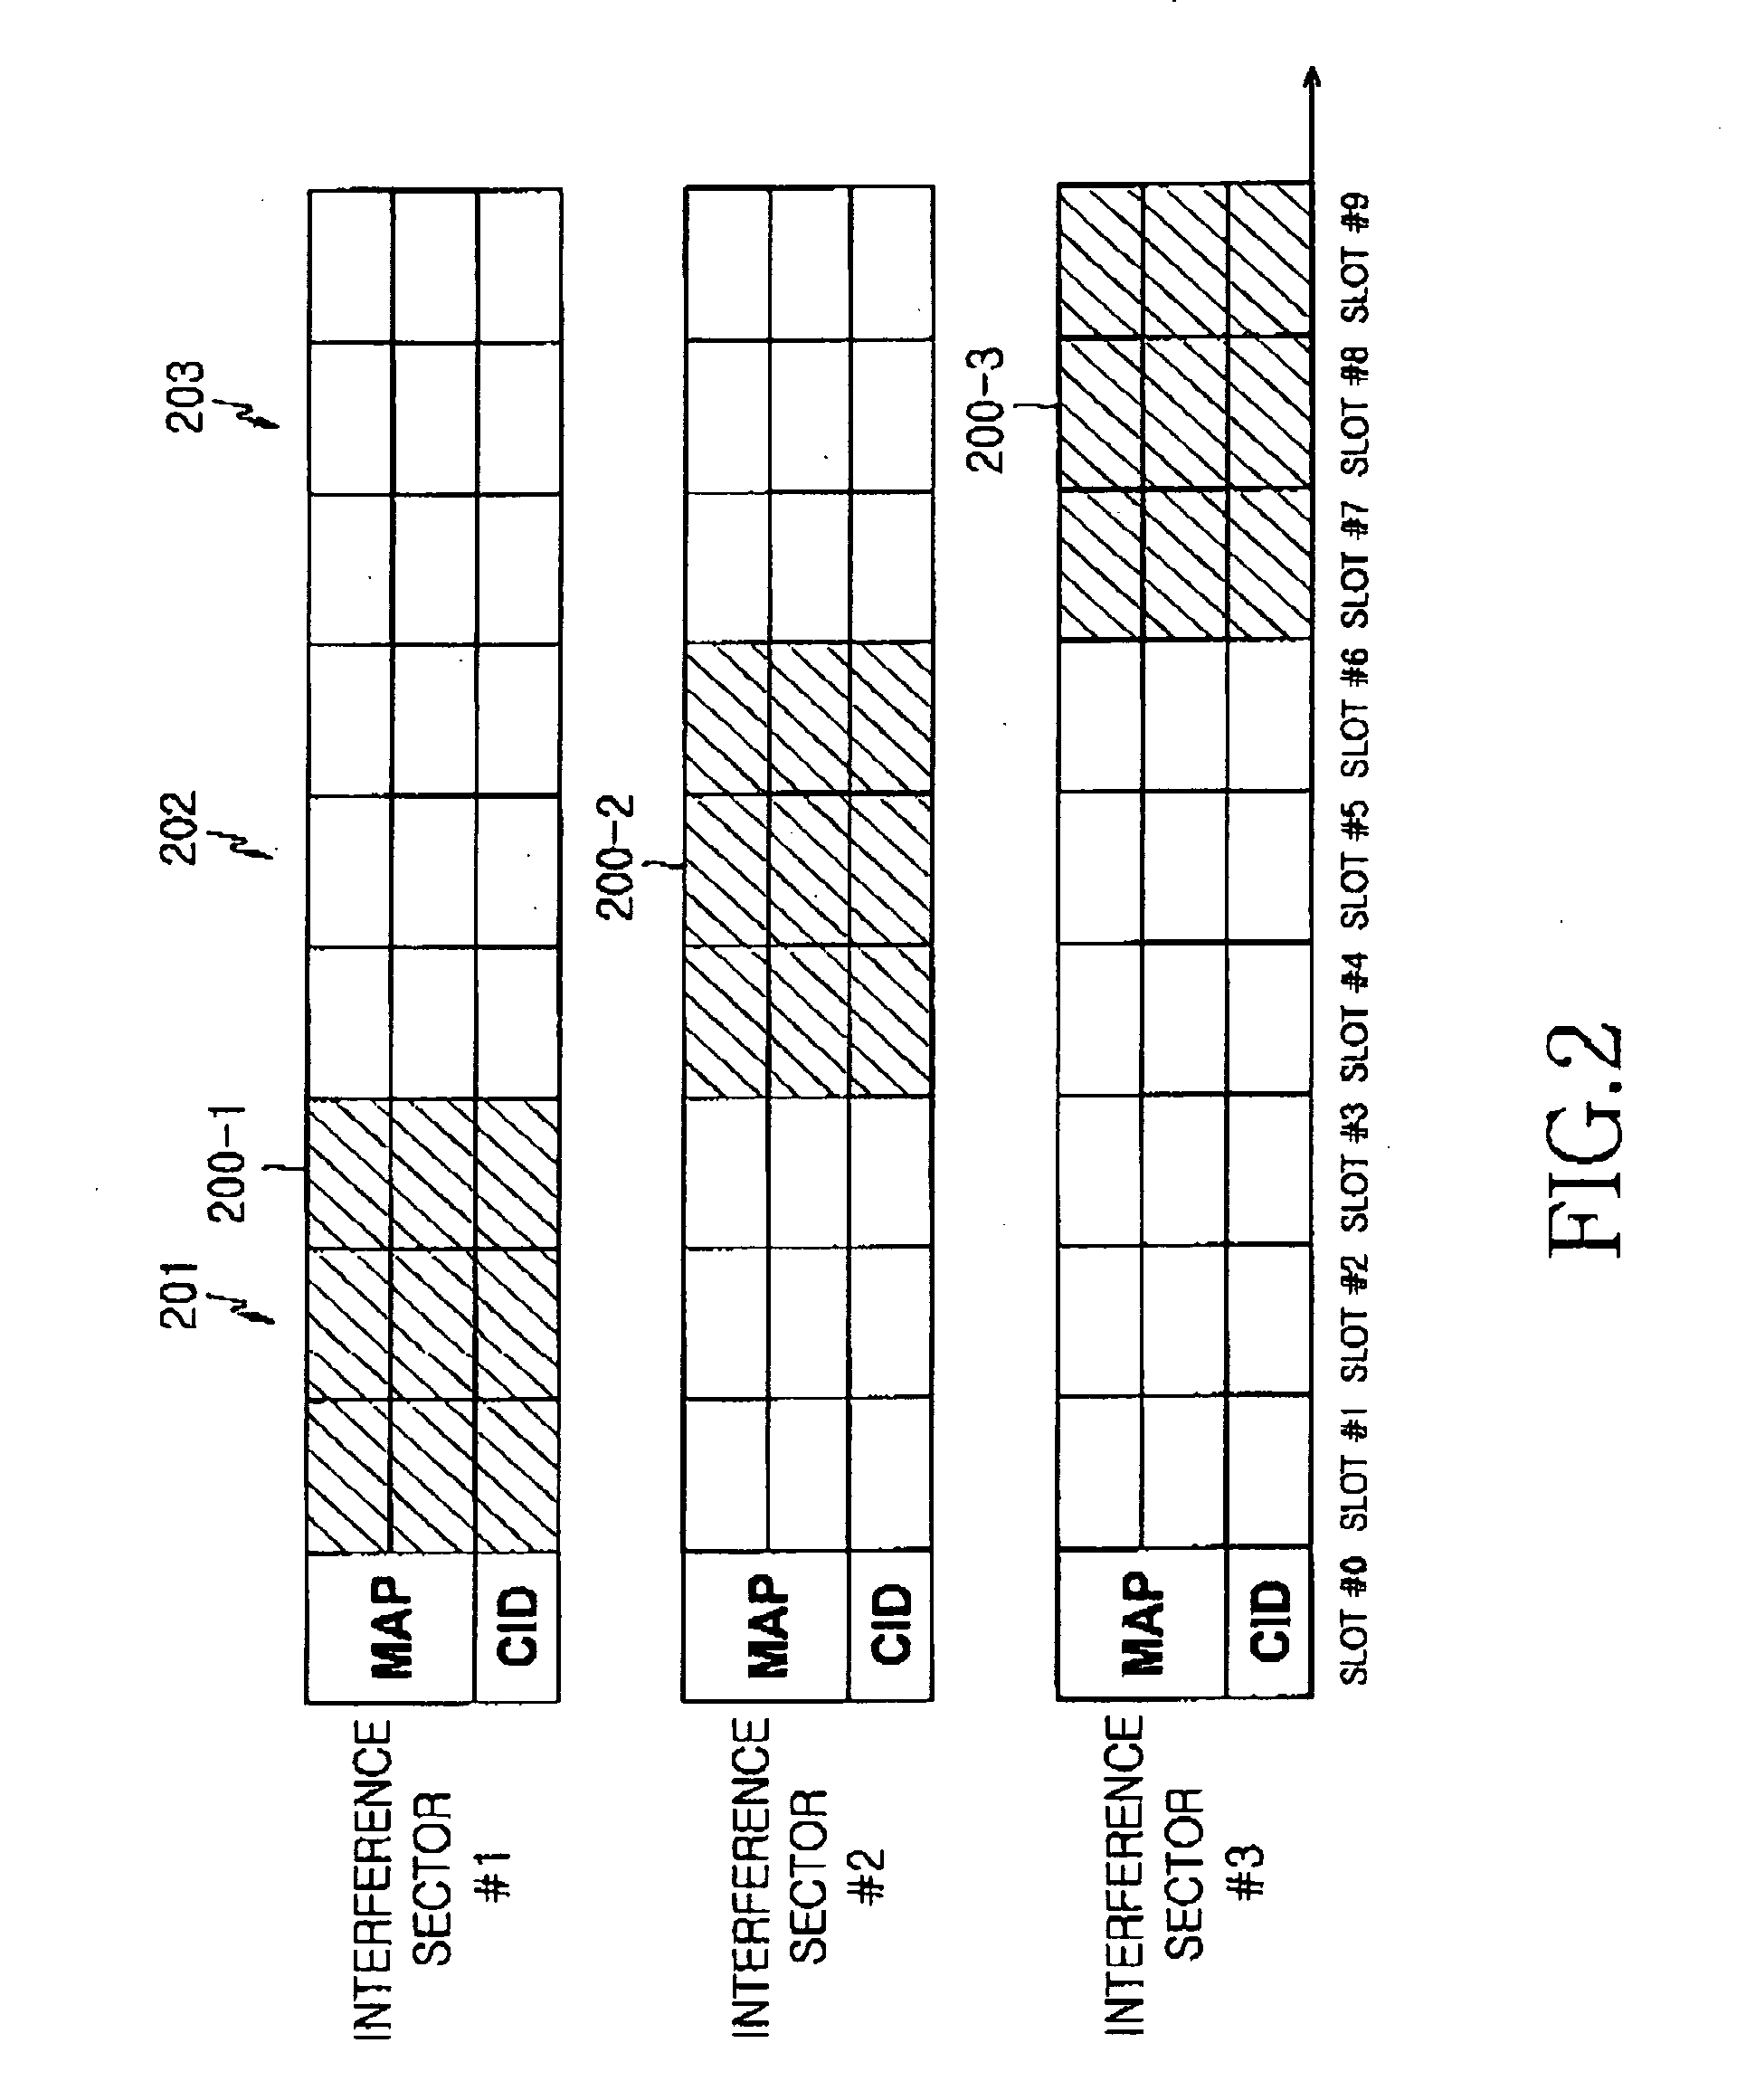 Resource allocation scheduling method for a cellular communication system